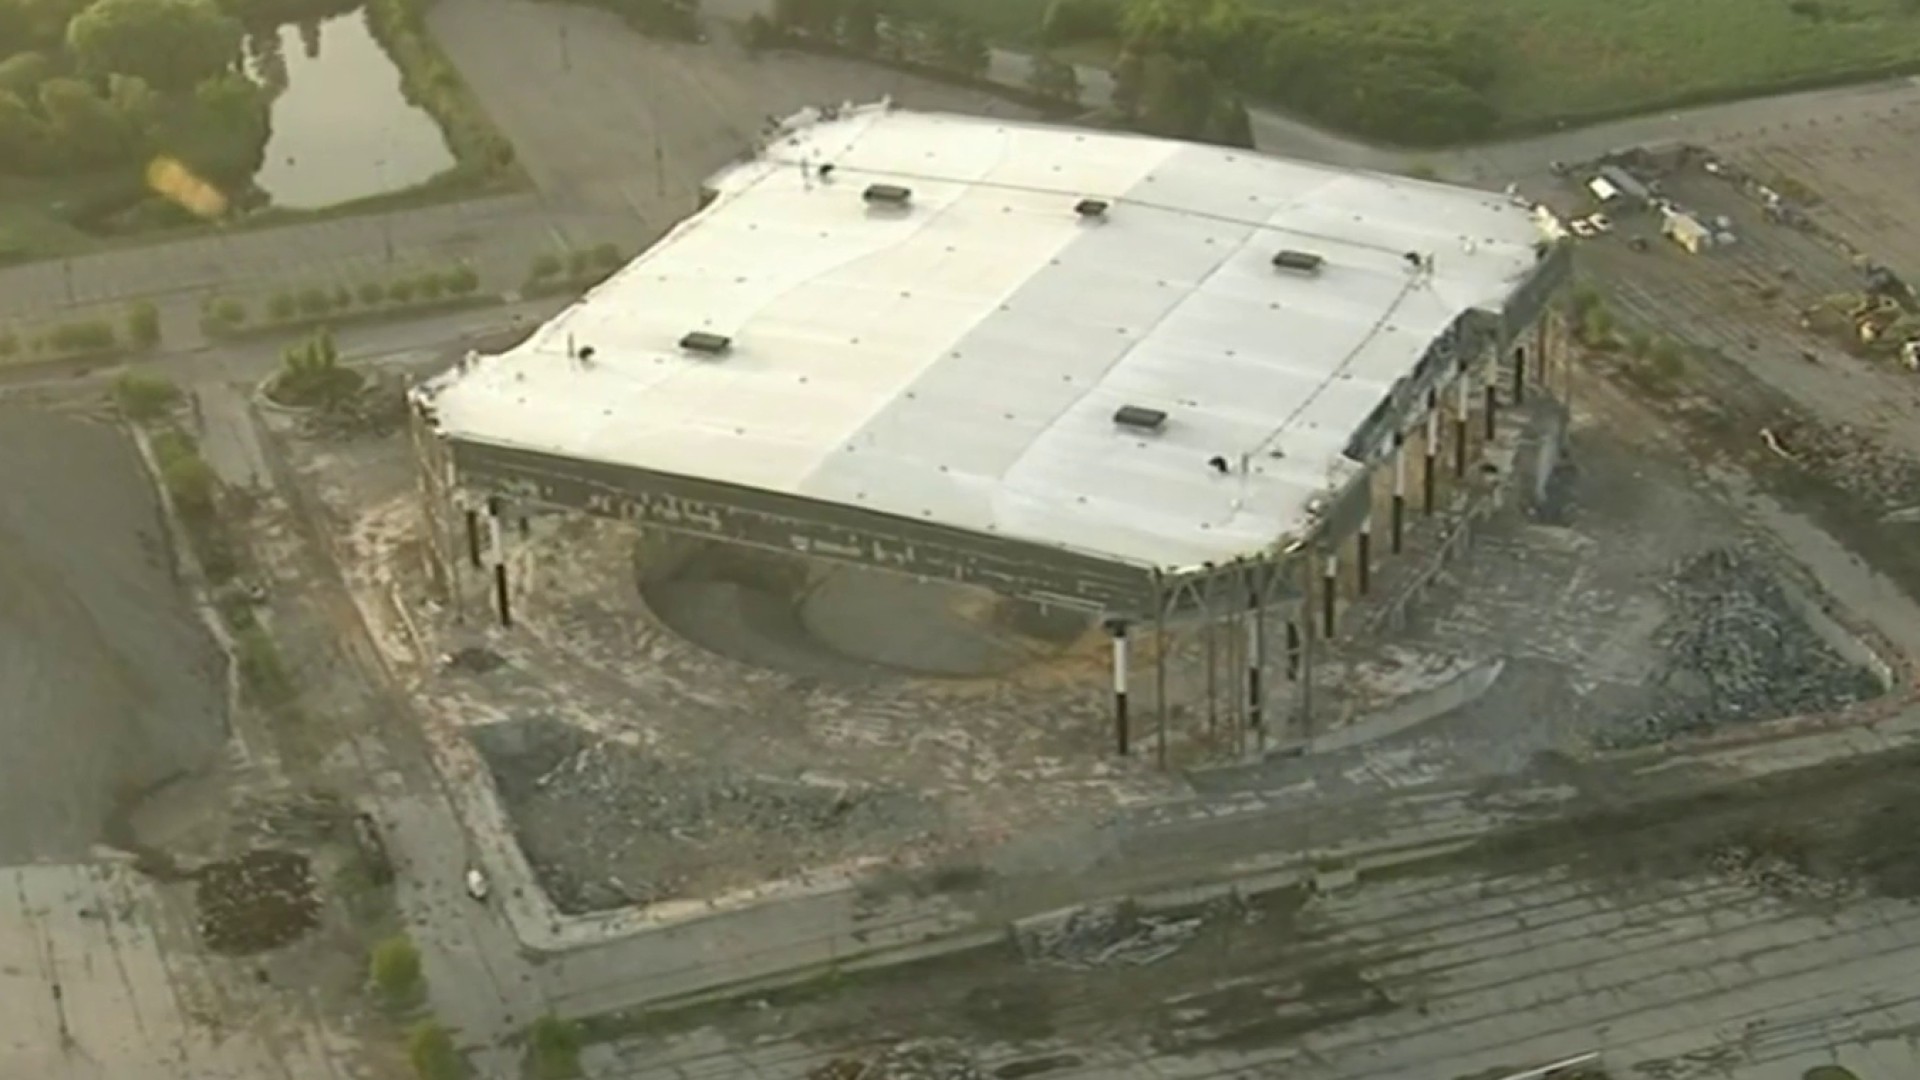 The Palace of Auburn Hills to be imploded this weekend